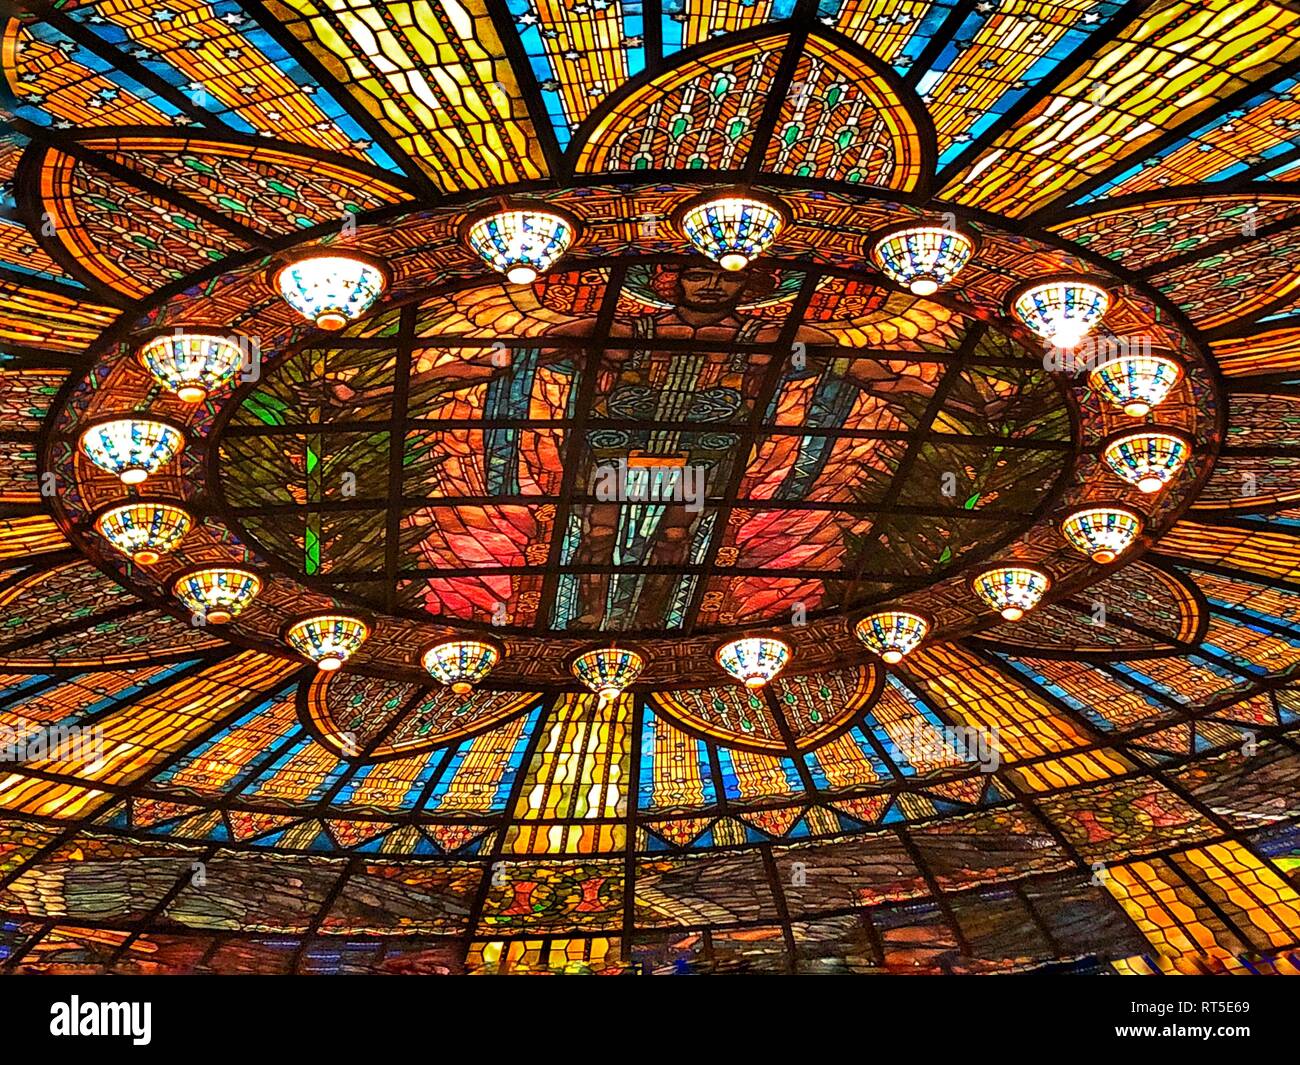 Stained Glass Roof of Bellas Artes in Mexico City, DF Stock Photo